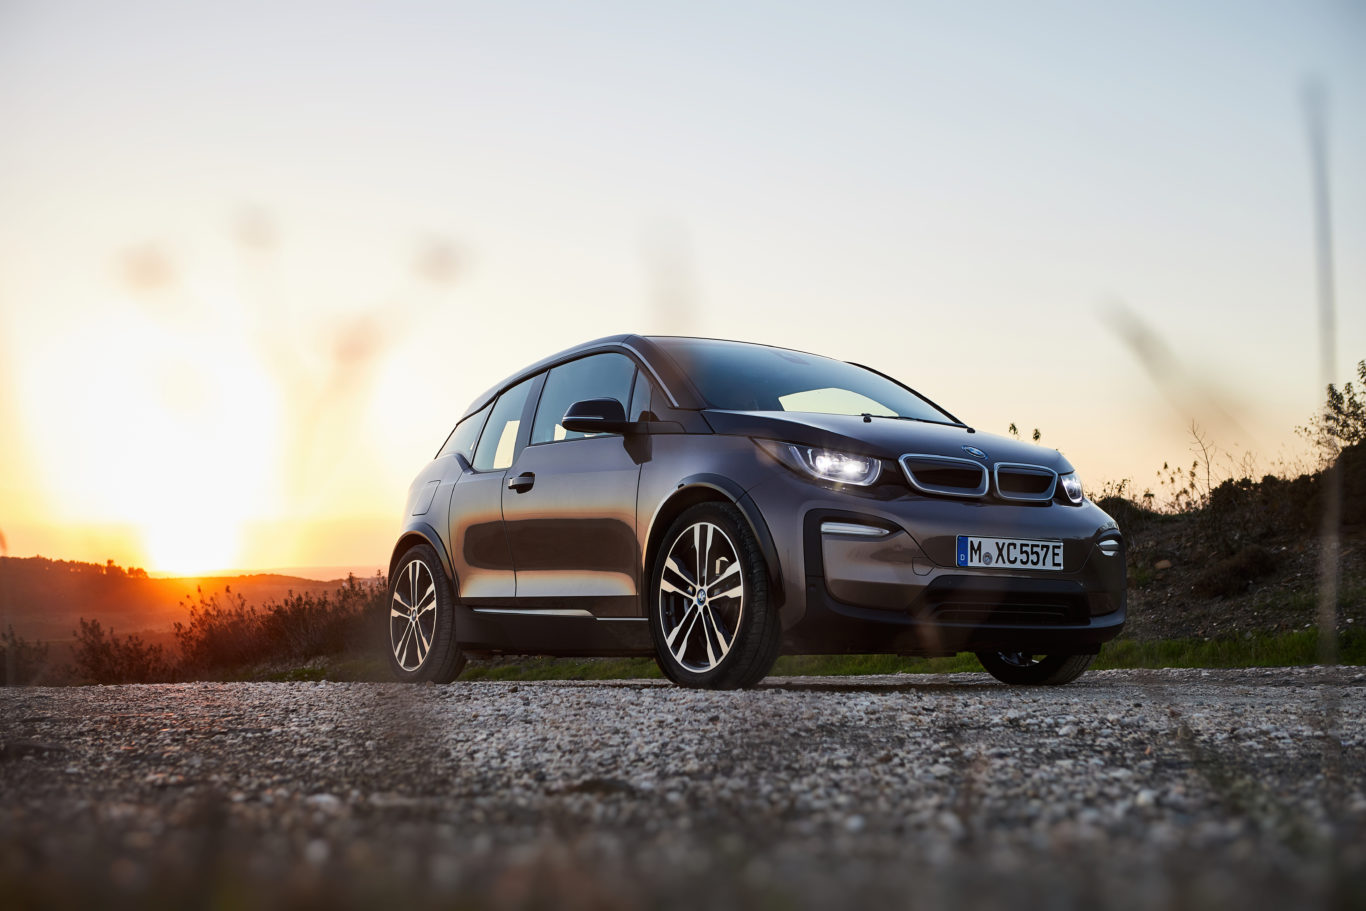 BMW's i3 is a great choice for urban drivers